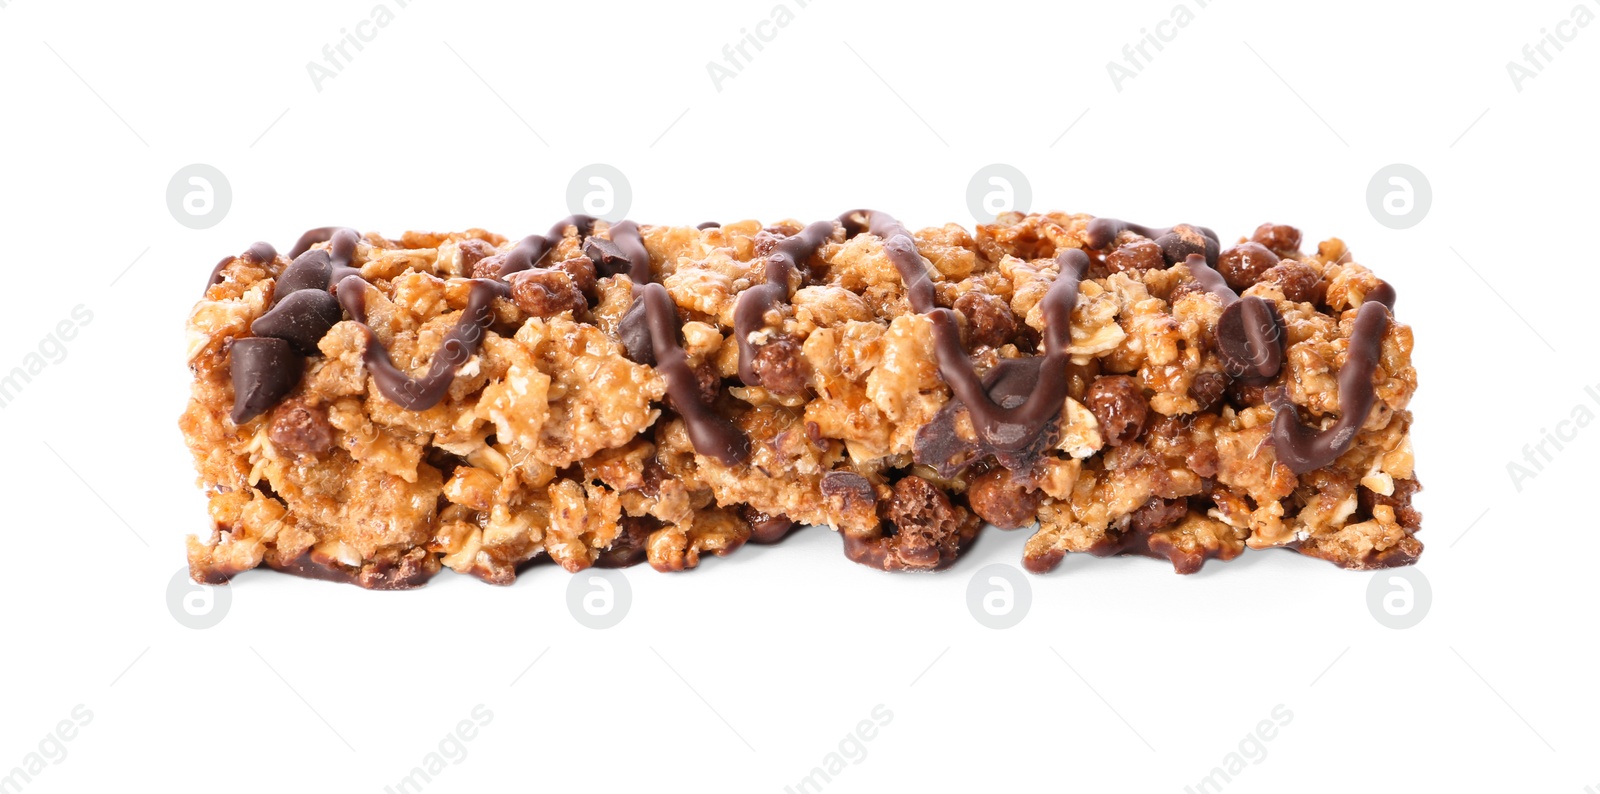 Image of Crunchy granola bar with chocolate on white background